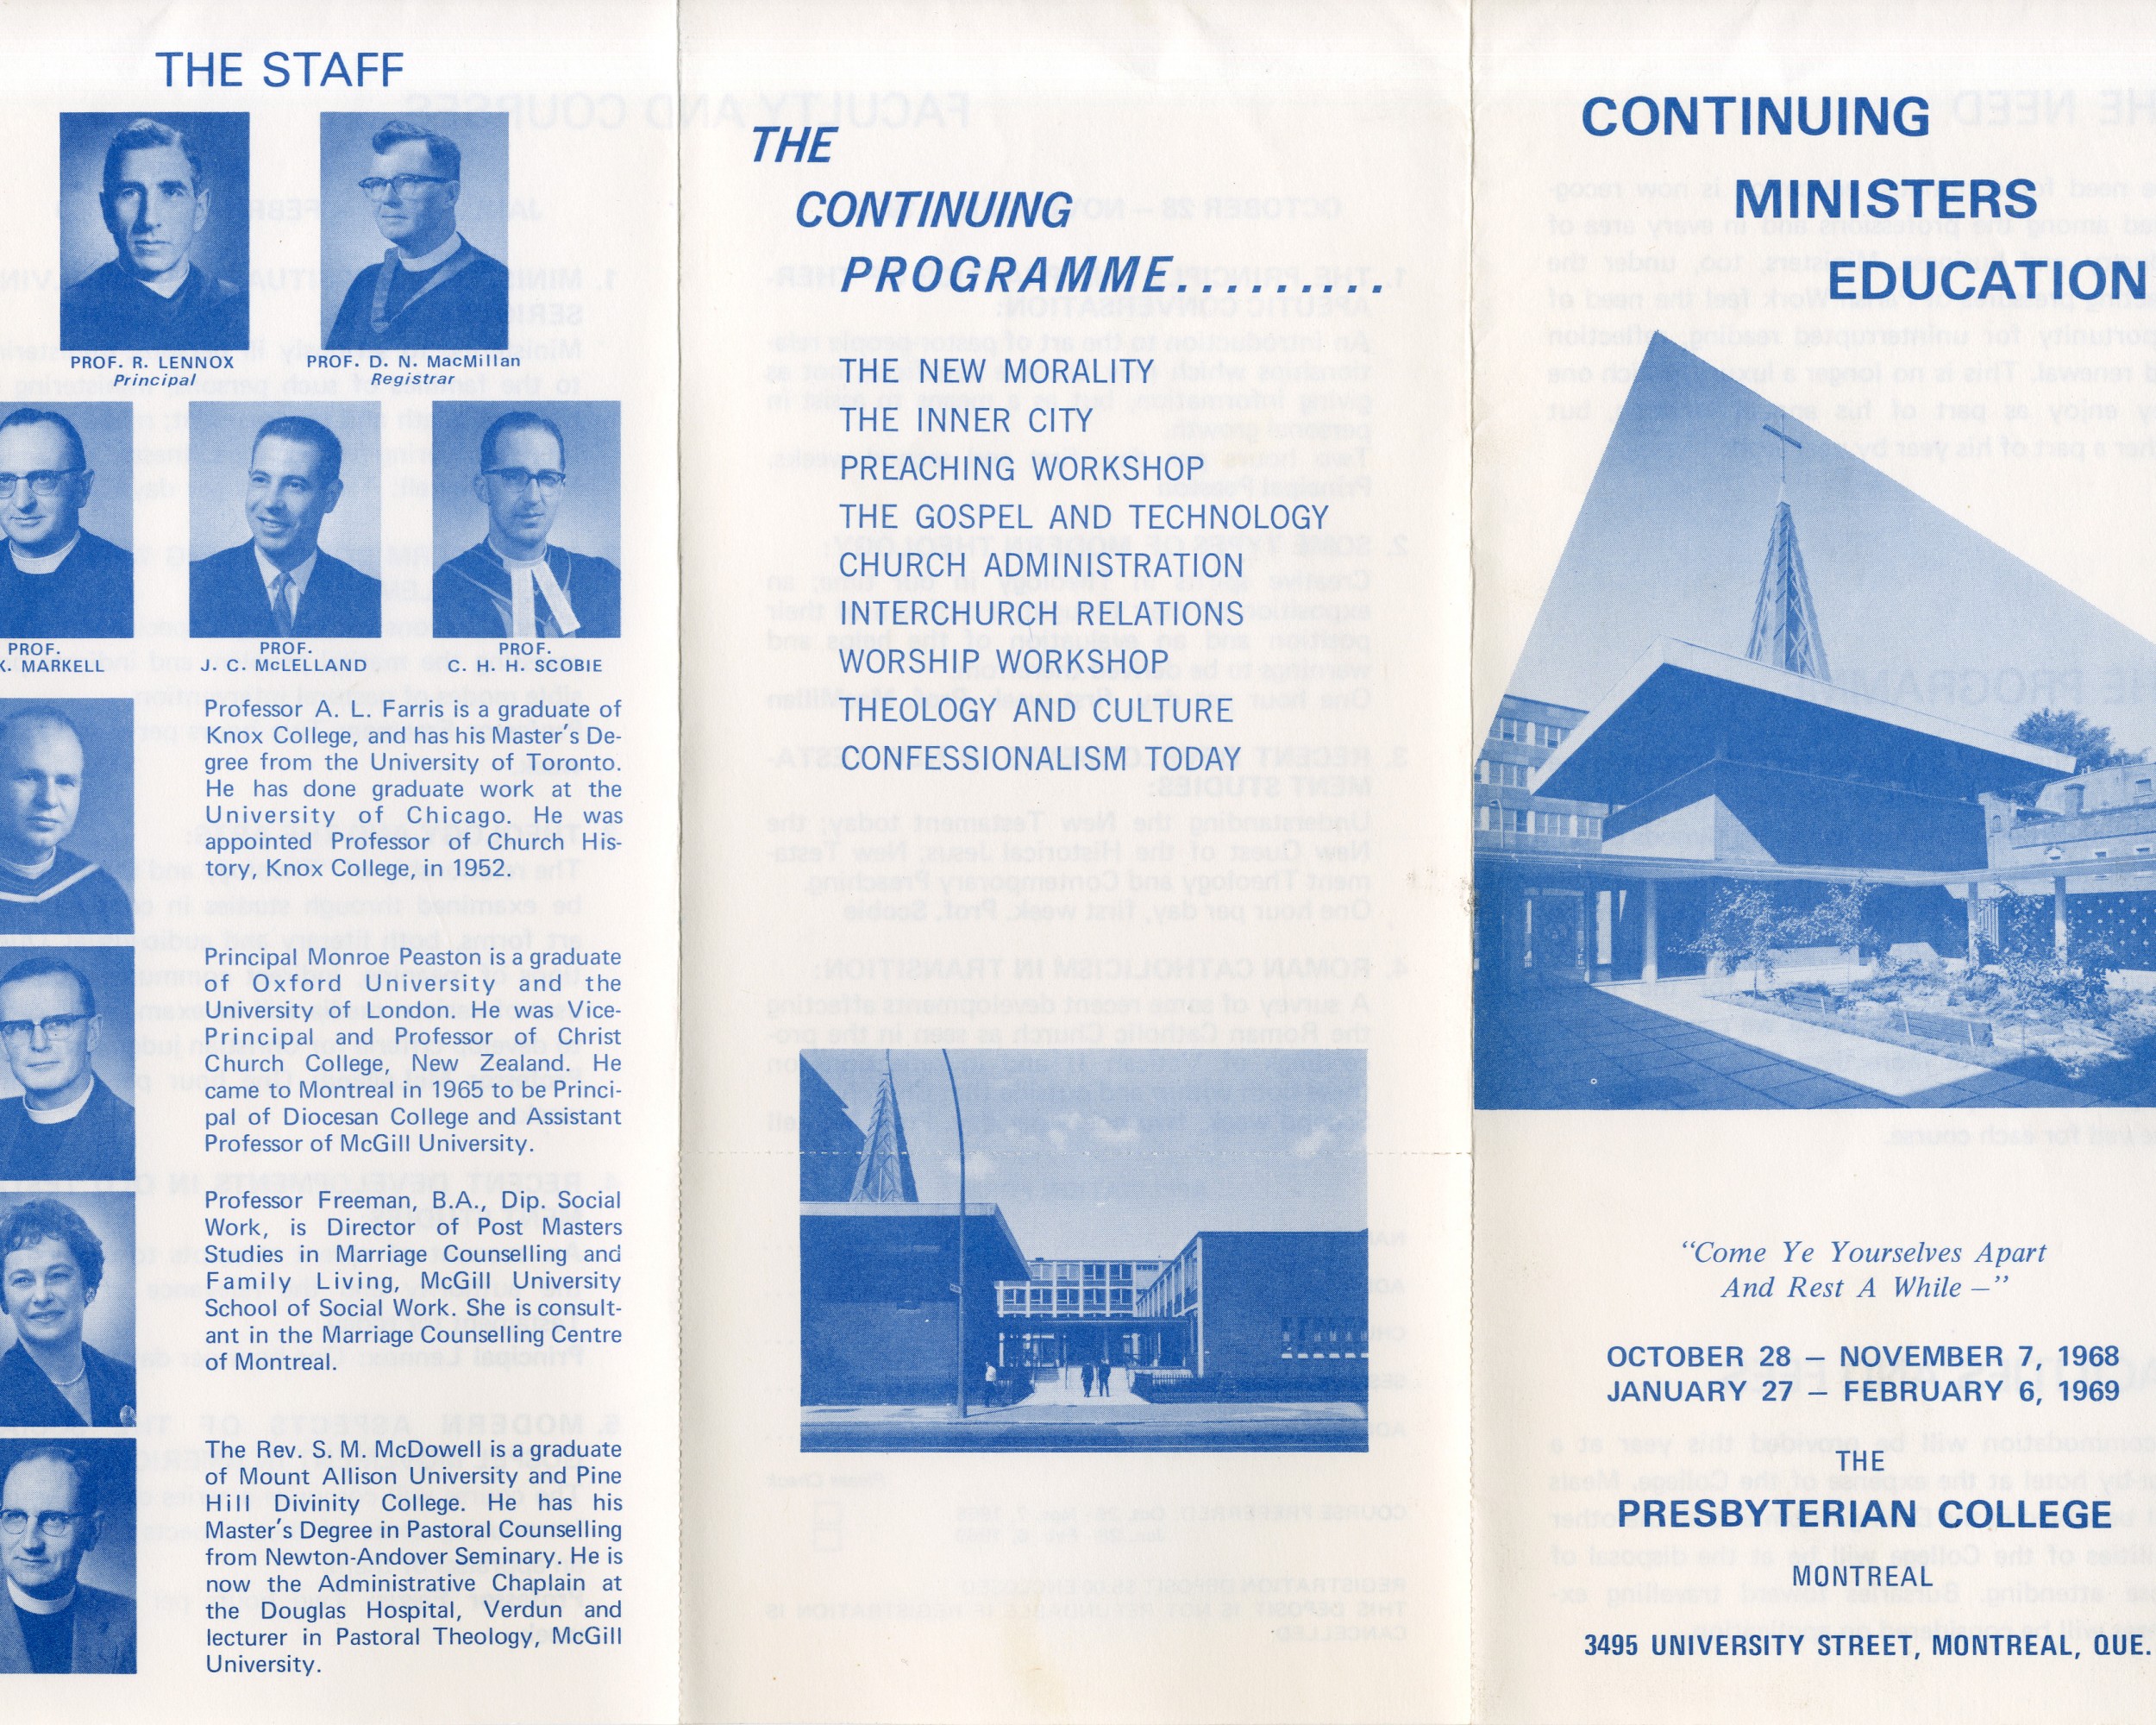 Continuing education for ministers 1969